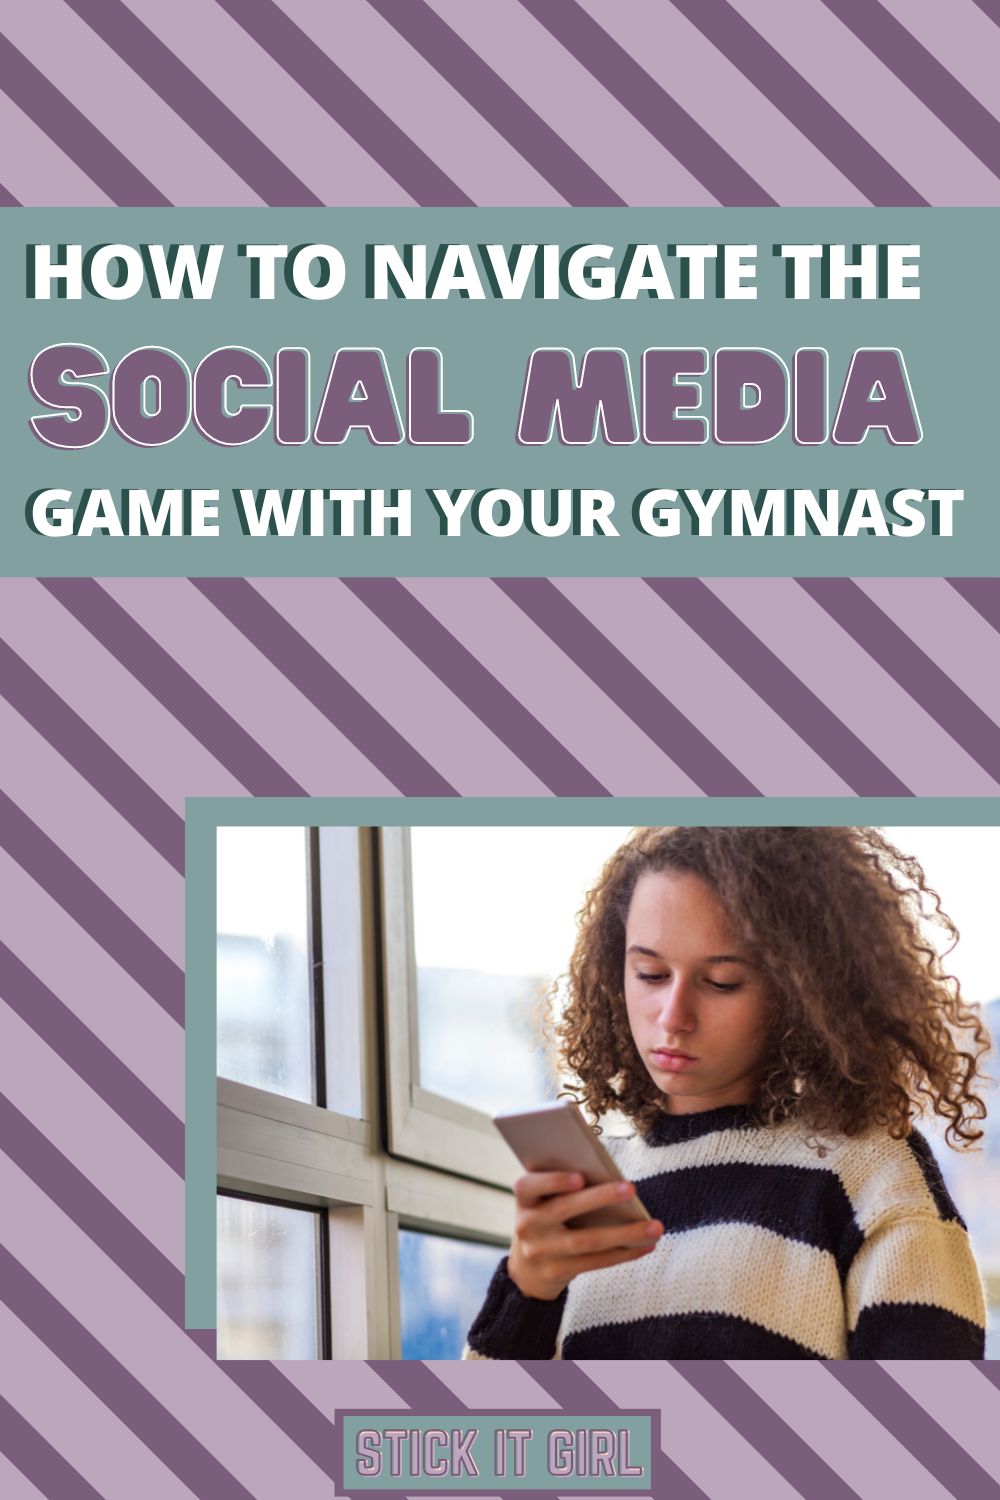 How to navigate the social media game with your gymnast - Stick It Girl Blog